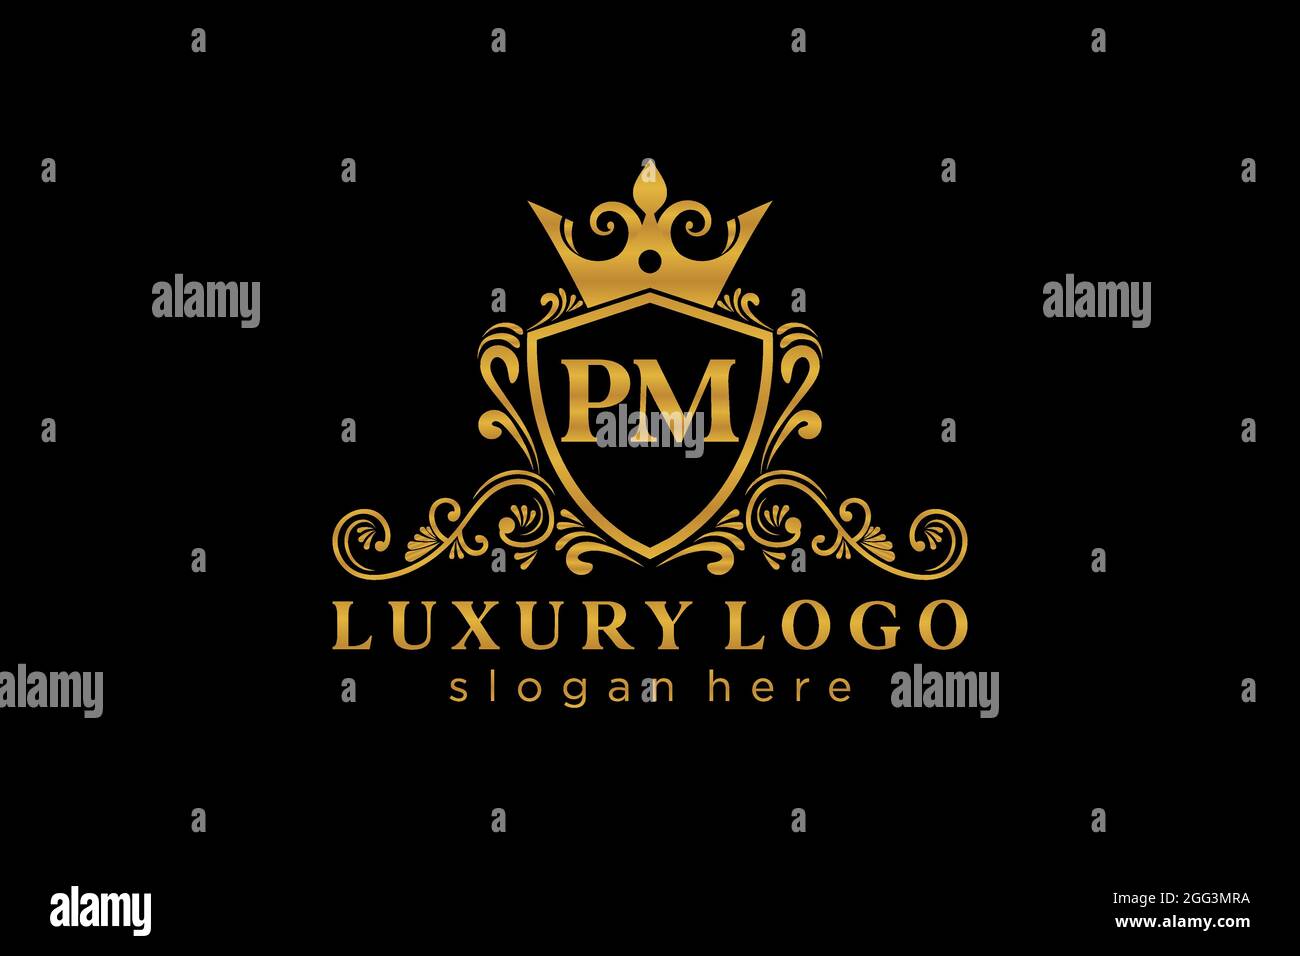 PM Letter Royal Luxury Logo template in vector art for Restaurant, Royalty, Boutique, Cafe, Hotel, Heraldic, Jewelry, Fashion and other vector illustr Stock Vector